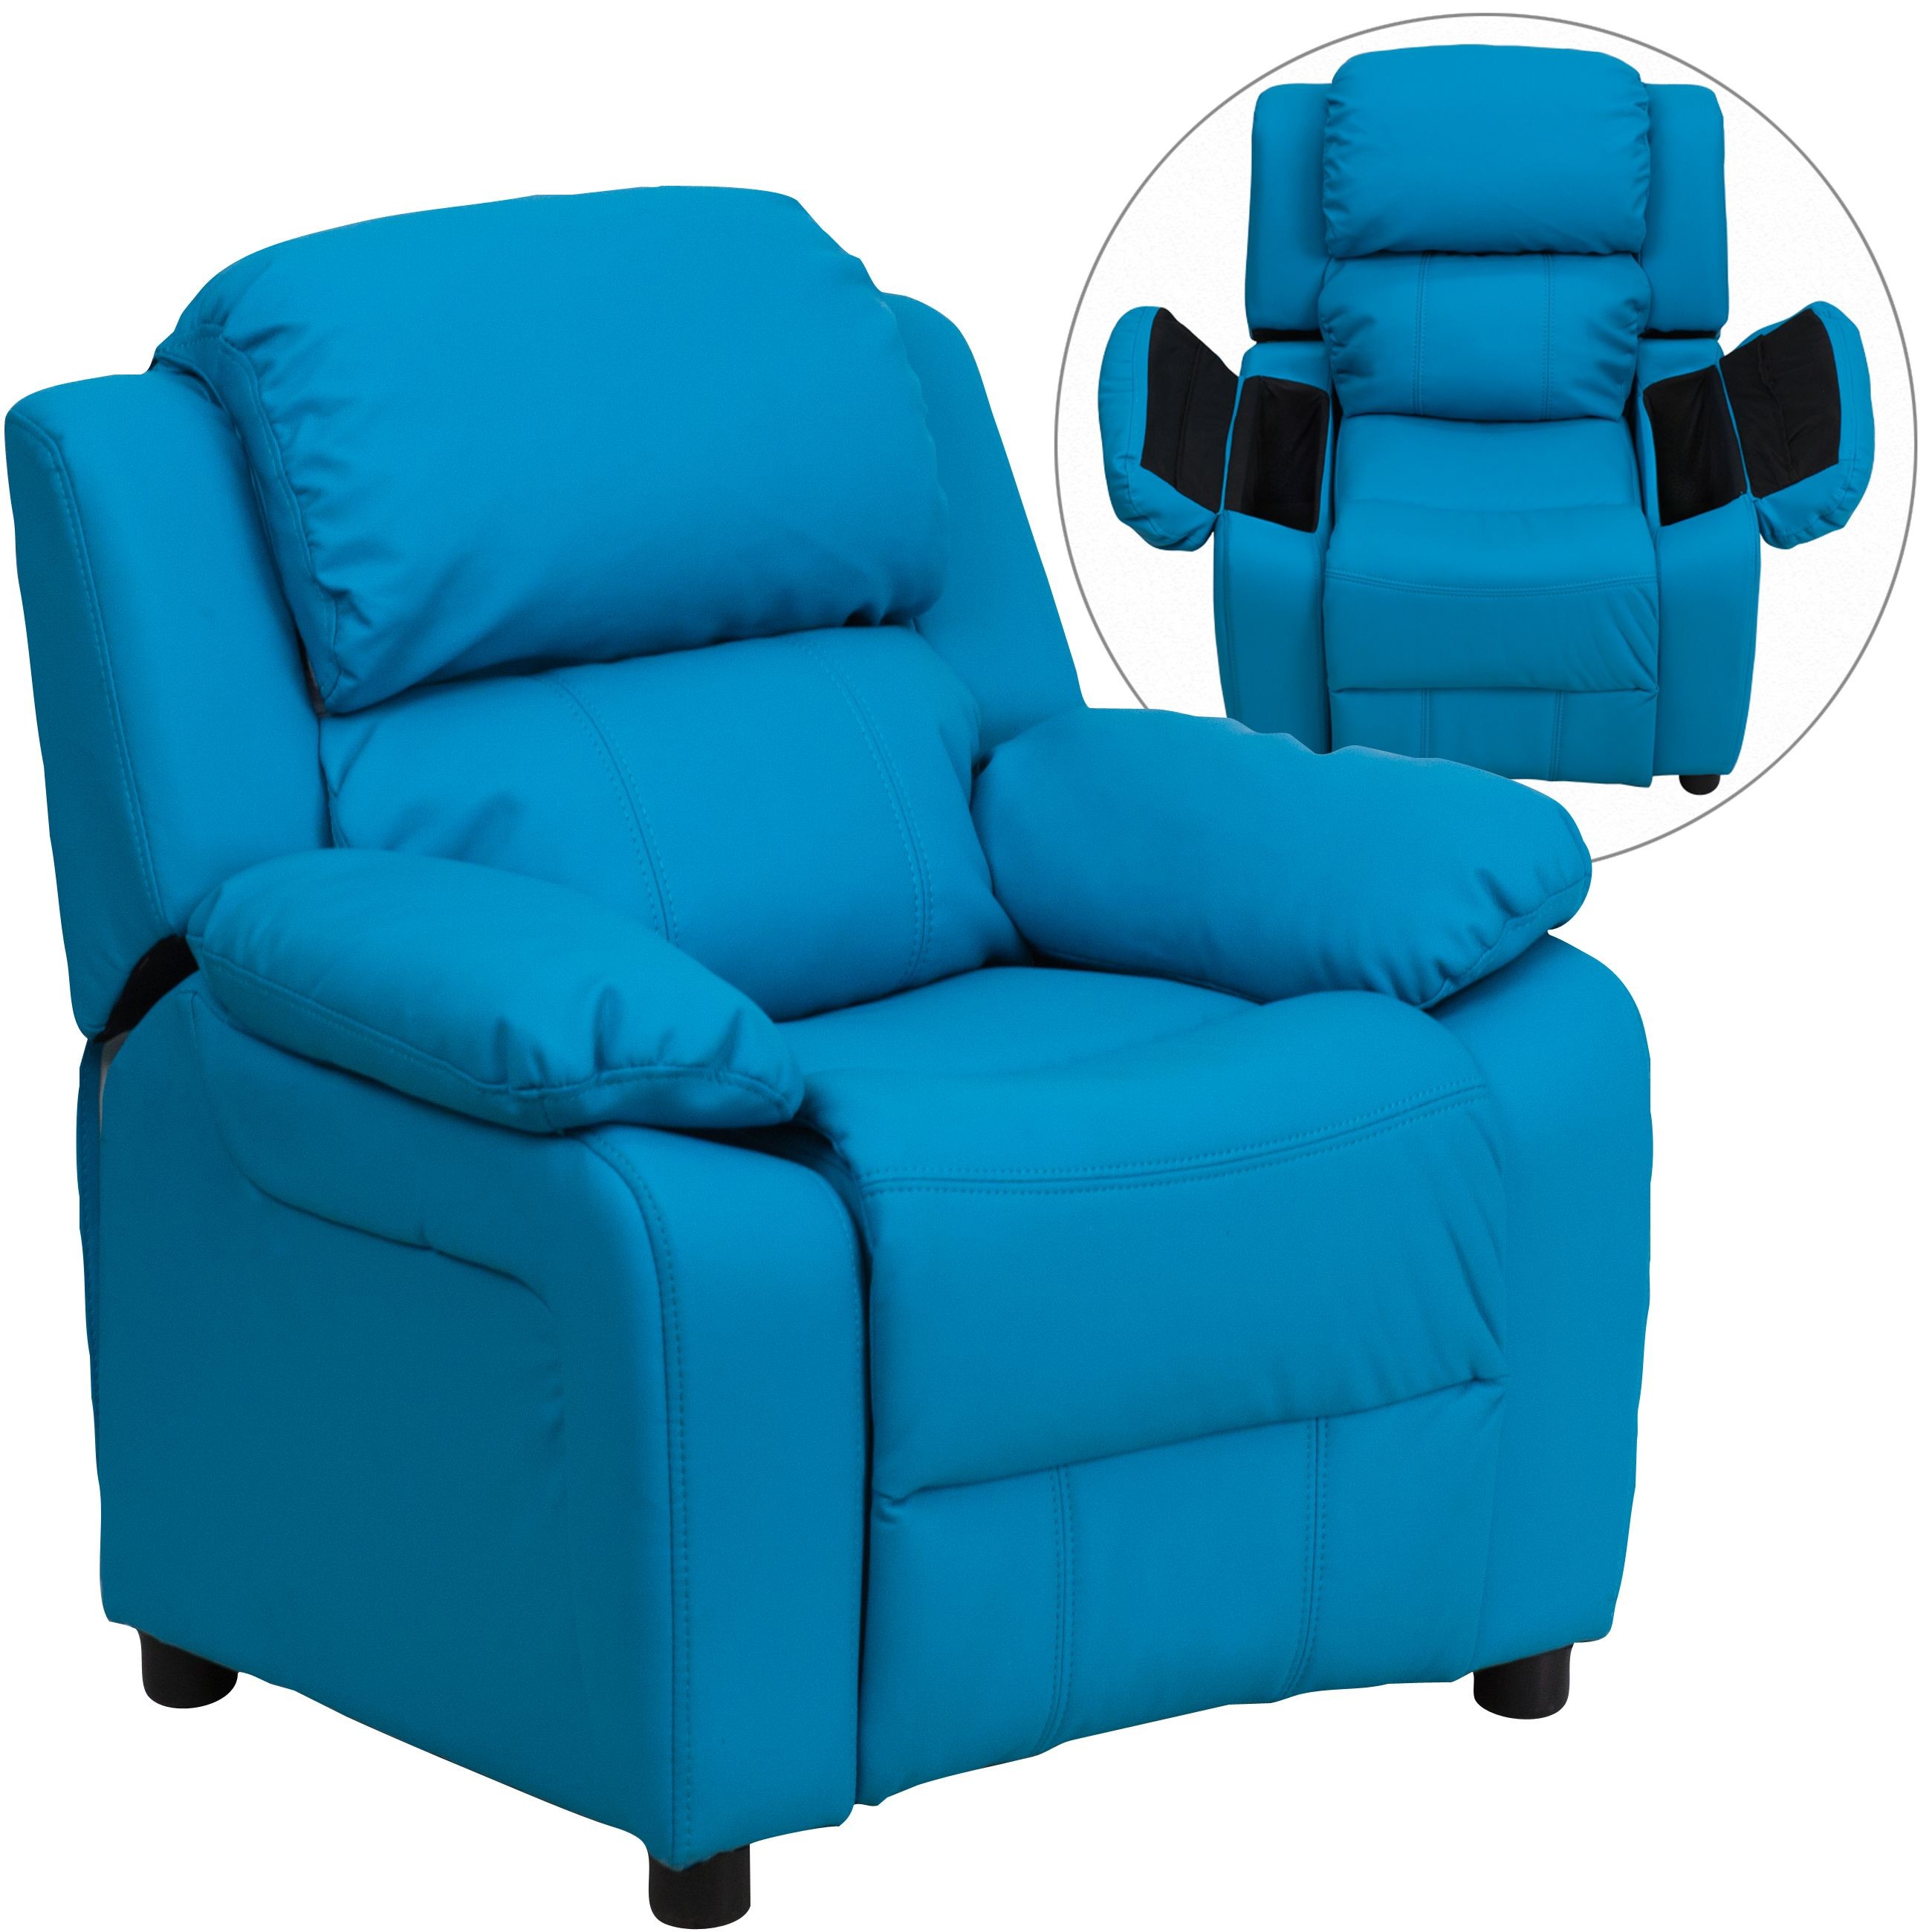 https://www.lionsdeal.com/itempics/Deluxe-Heavily-Padded-Contemporary-Turquoise-Vinyl-Kids-Recliner-with-Storage-Arms-4960_xlarge.jpg